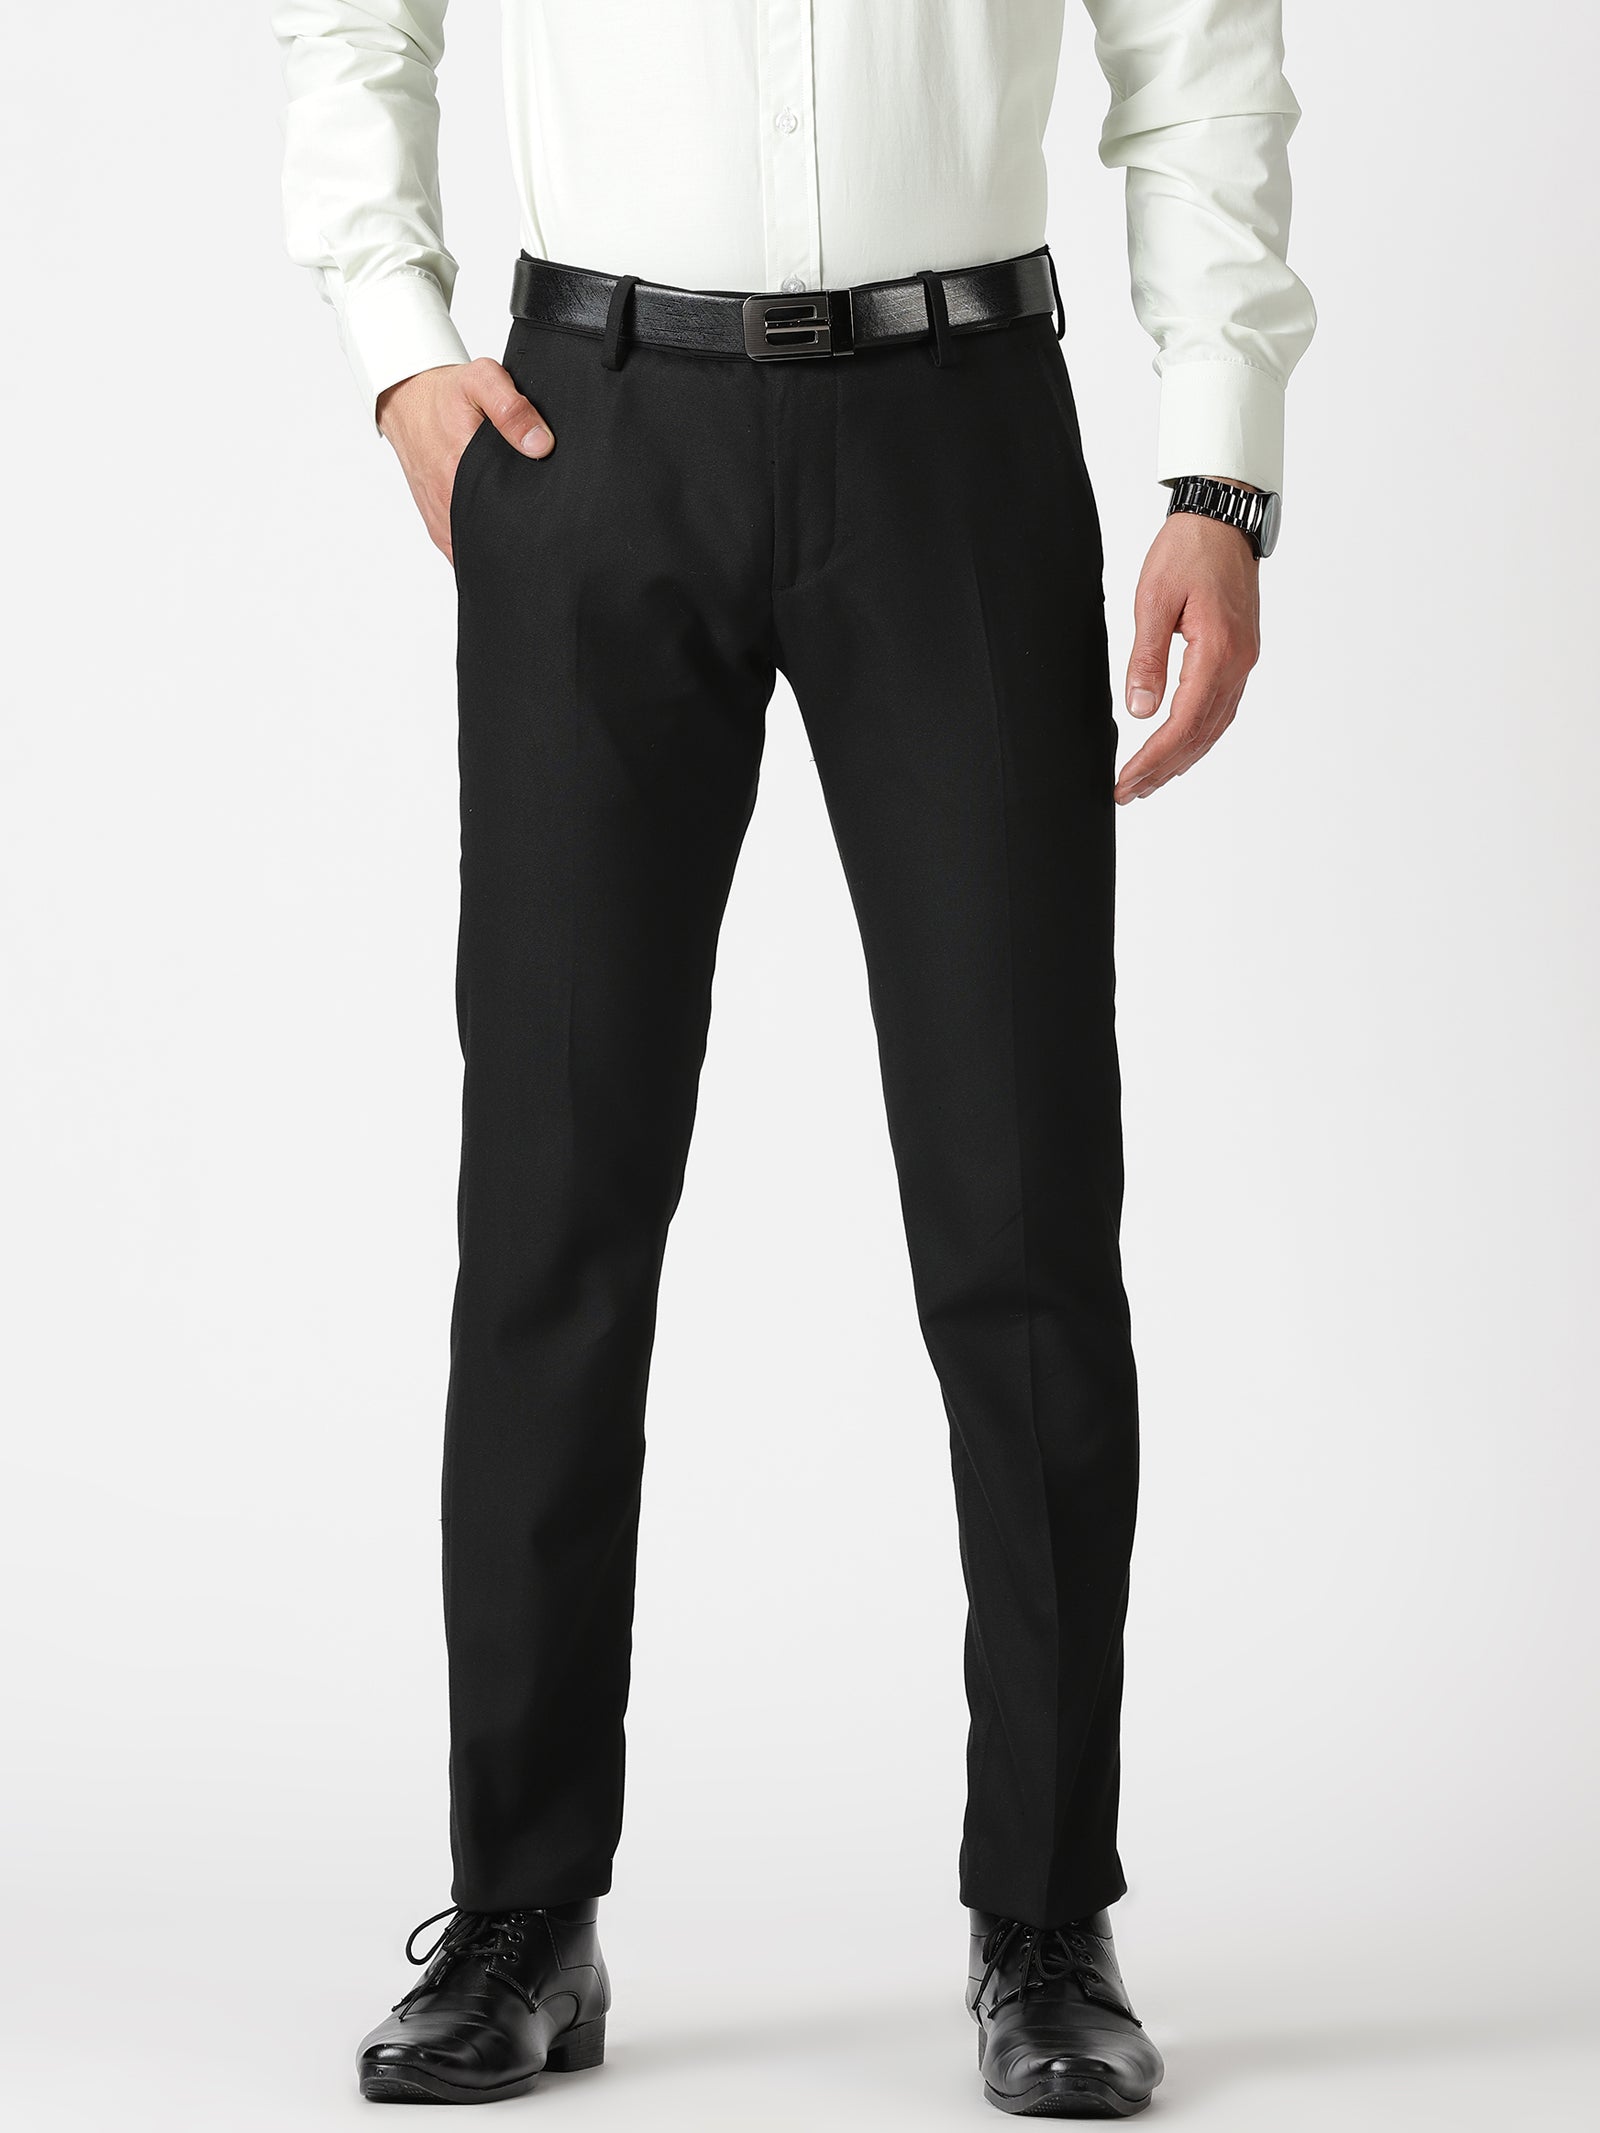 MENS BLACK SOLID TAPERED FIT TROUSER  JDC Store Online Shopping